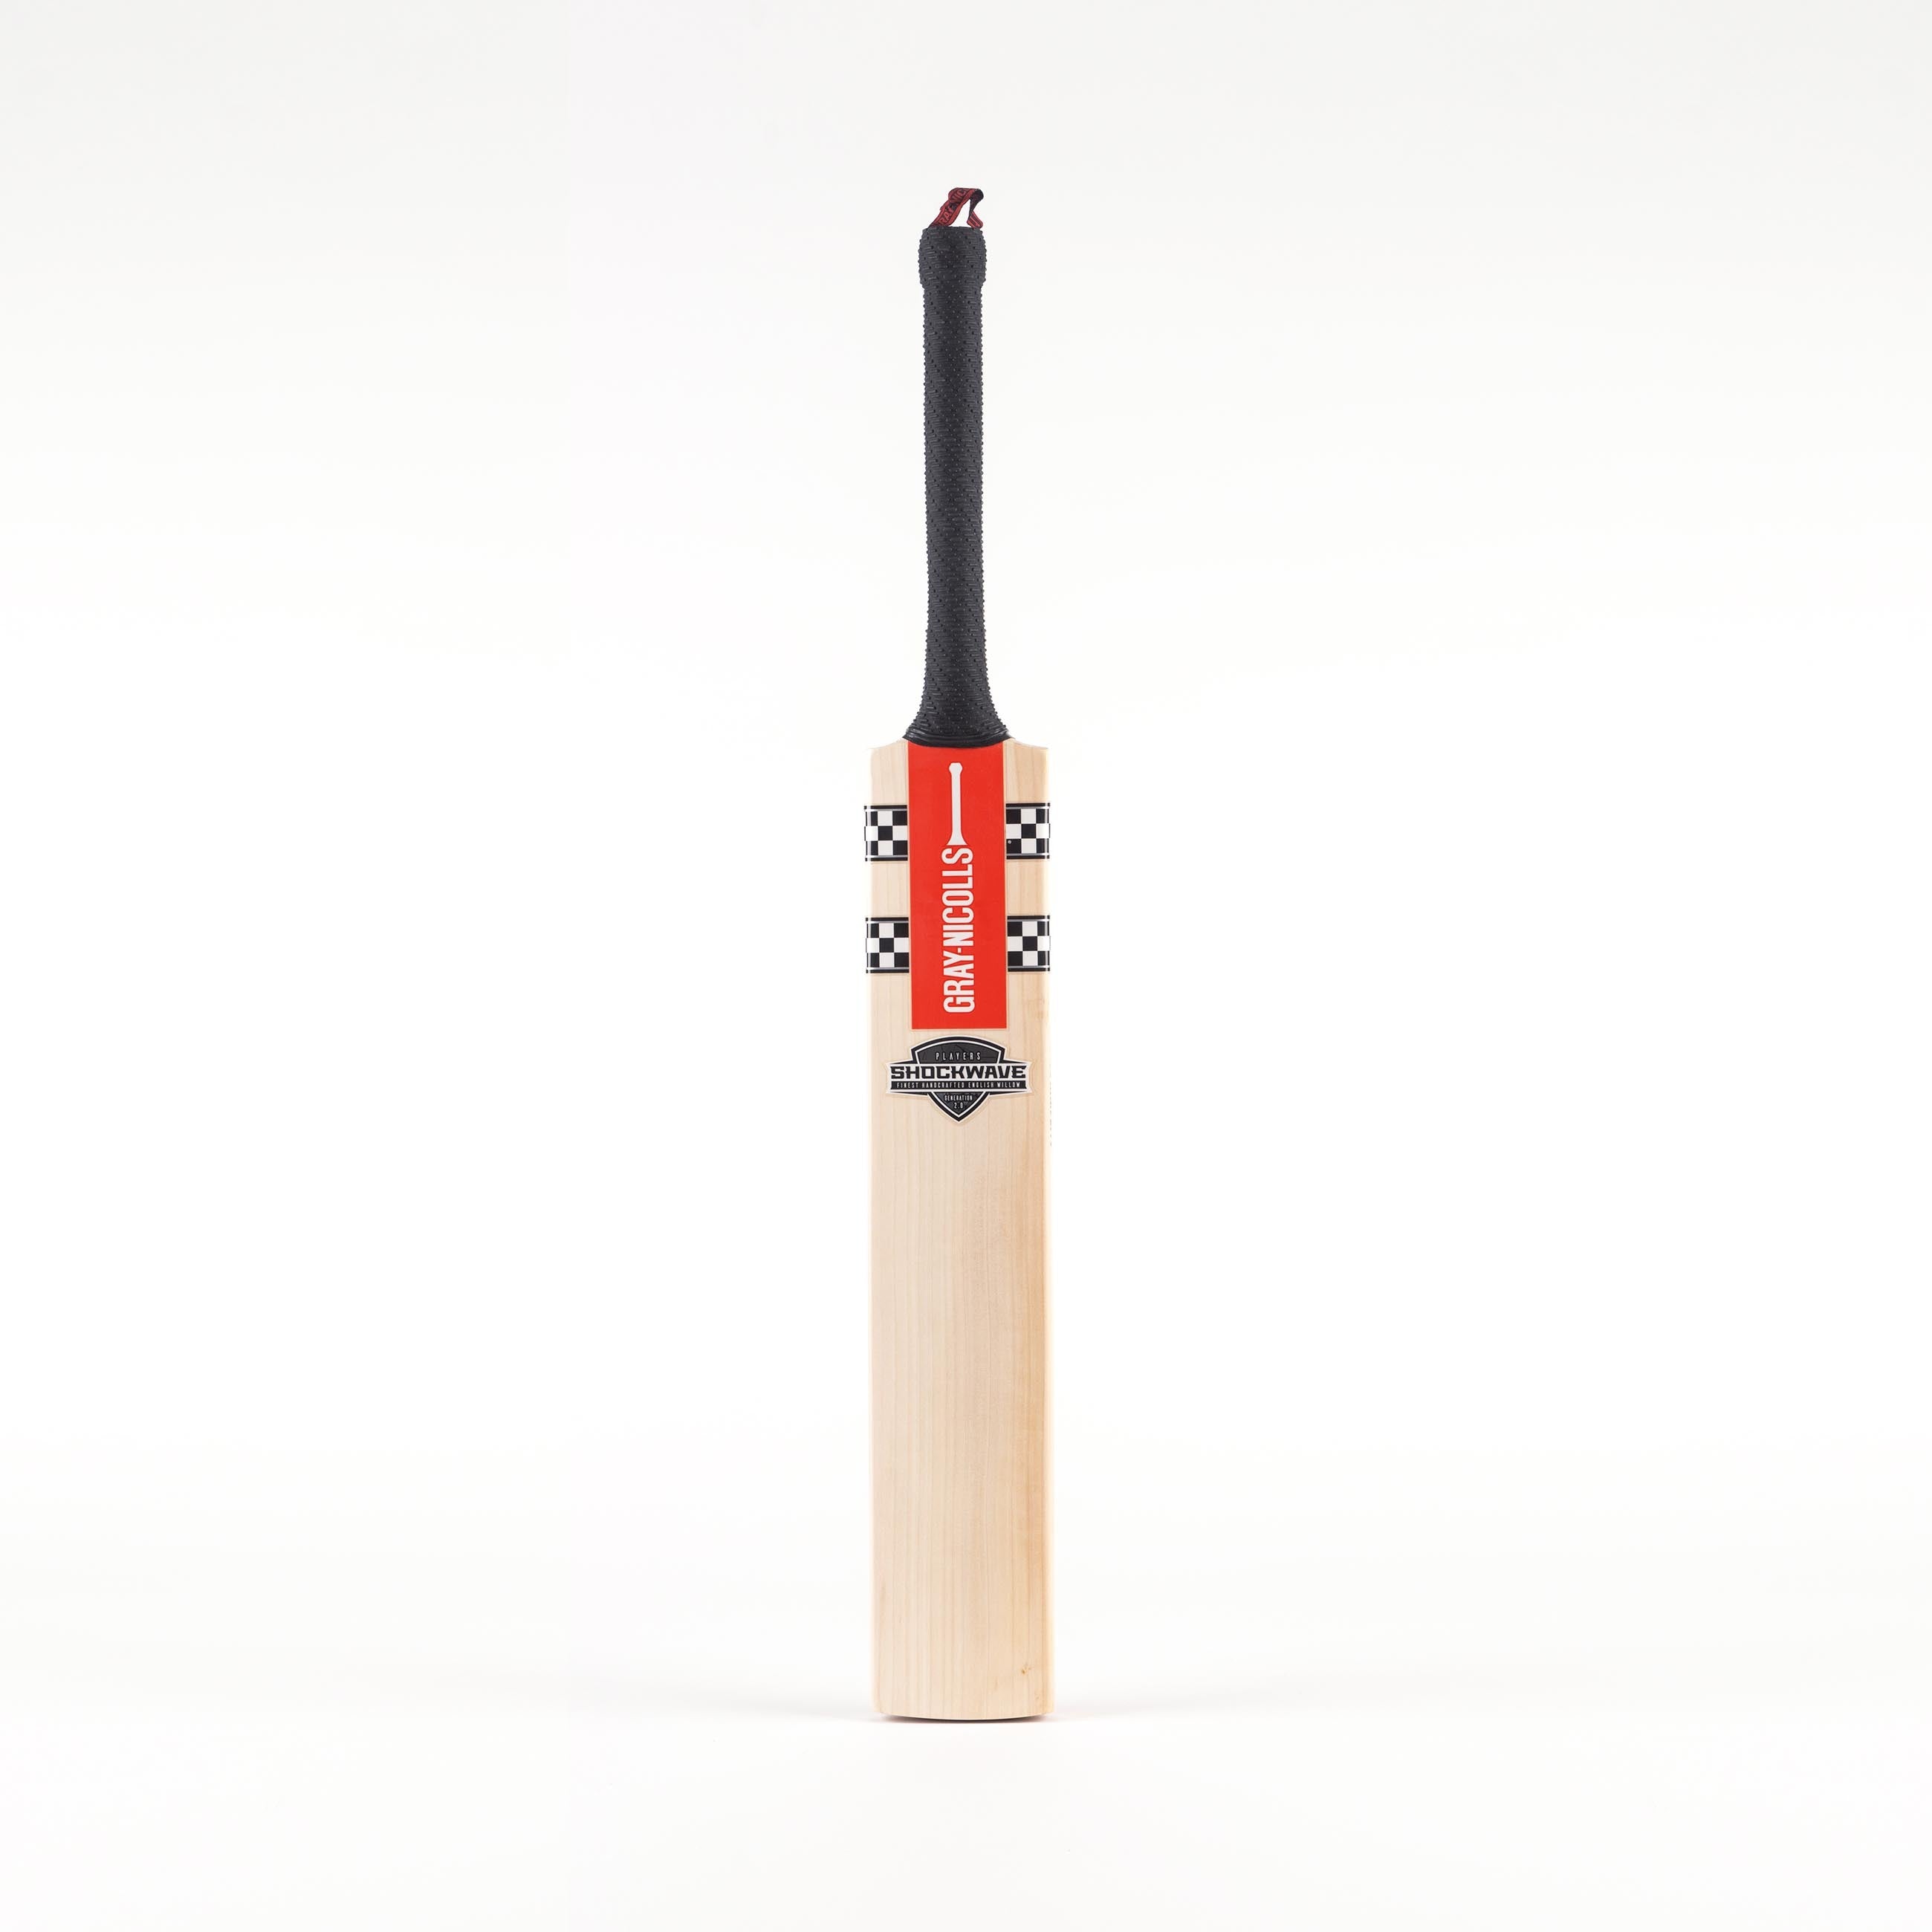 CACB24English Willow Bats Shockwave Gen 2.0 Players Bat, Face